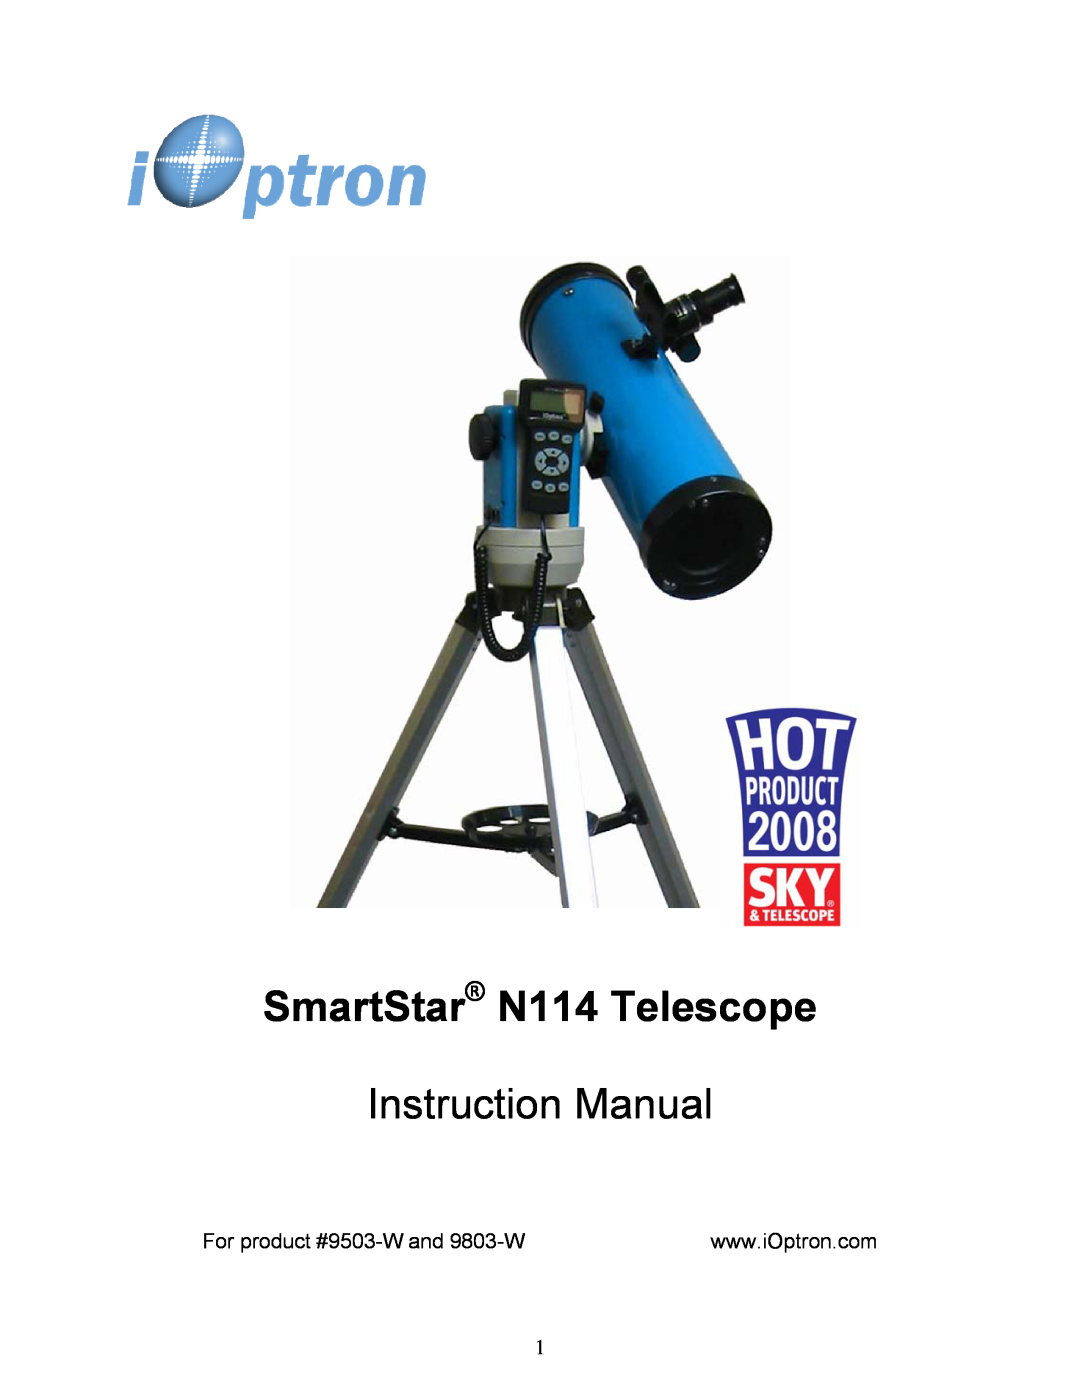 iOptron instruction manual For product #9503-Wand 9803-W, SmartStar N114 Telescope 